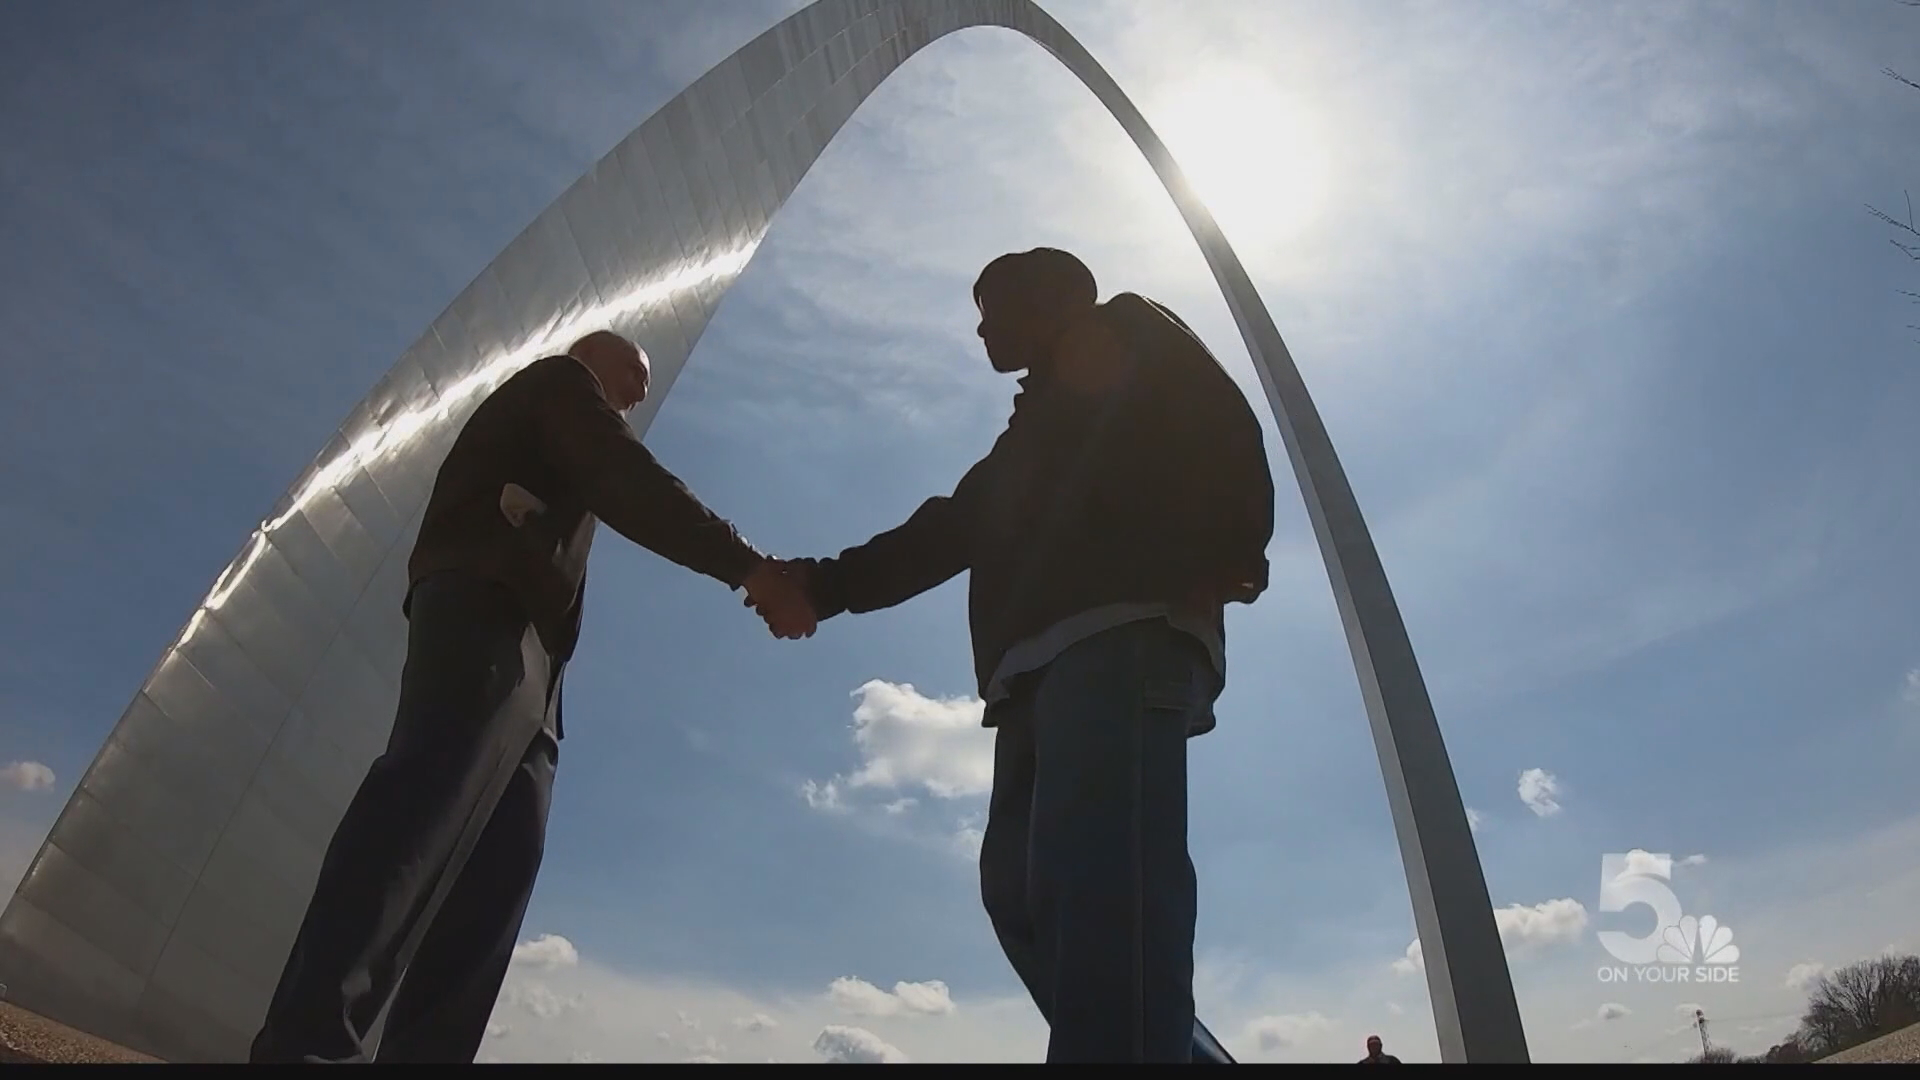 Green and Daley look back at their activism on behalf of Black construction workers. They climbed the ladder 125 up the side of the Arch in St. Louis in 1964.